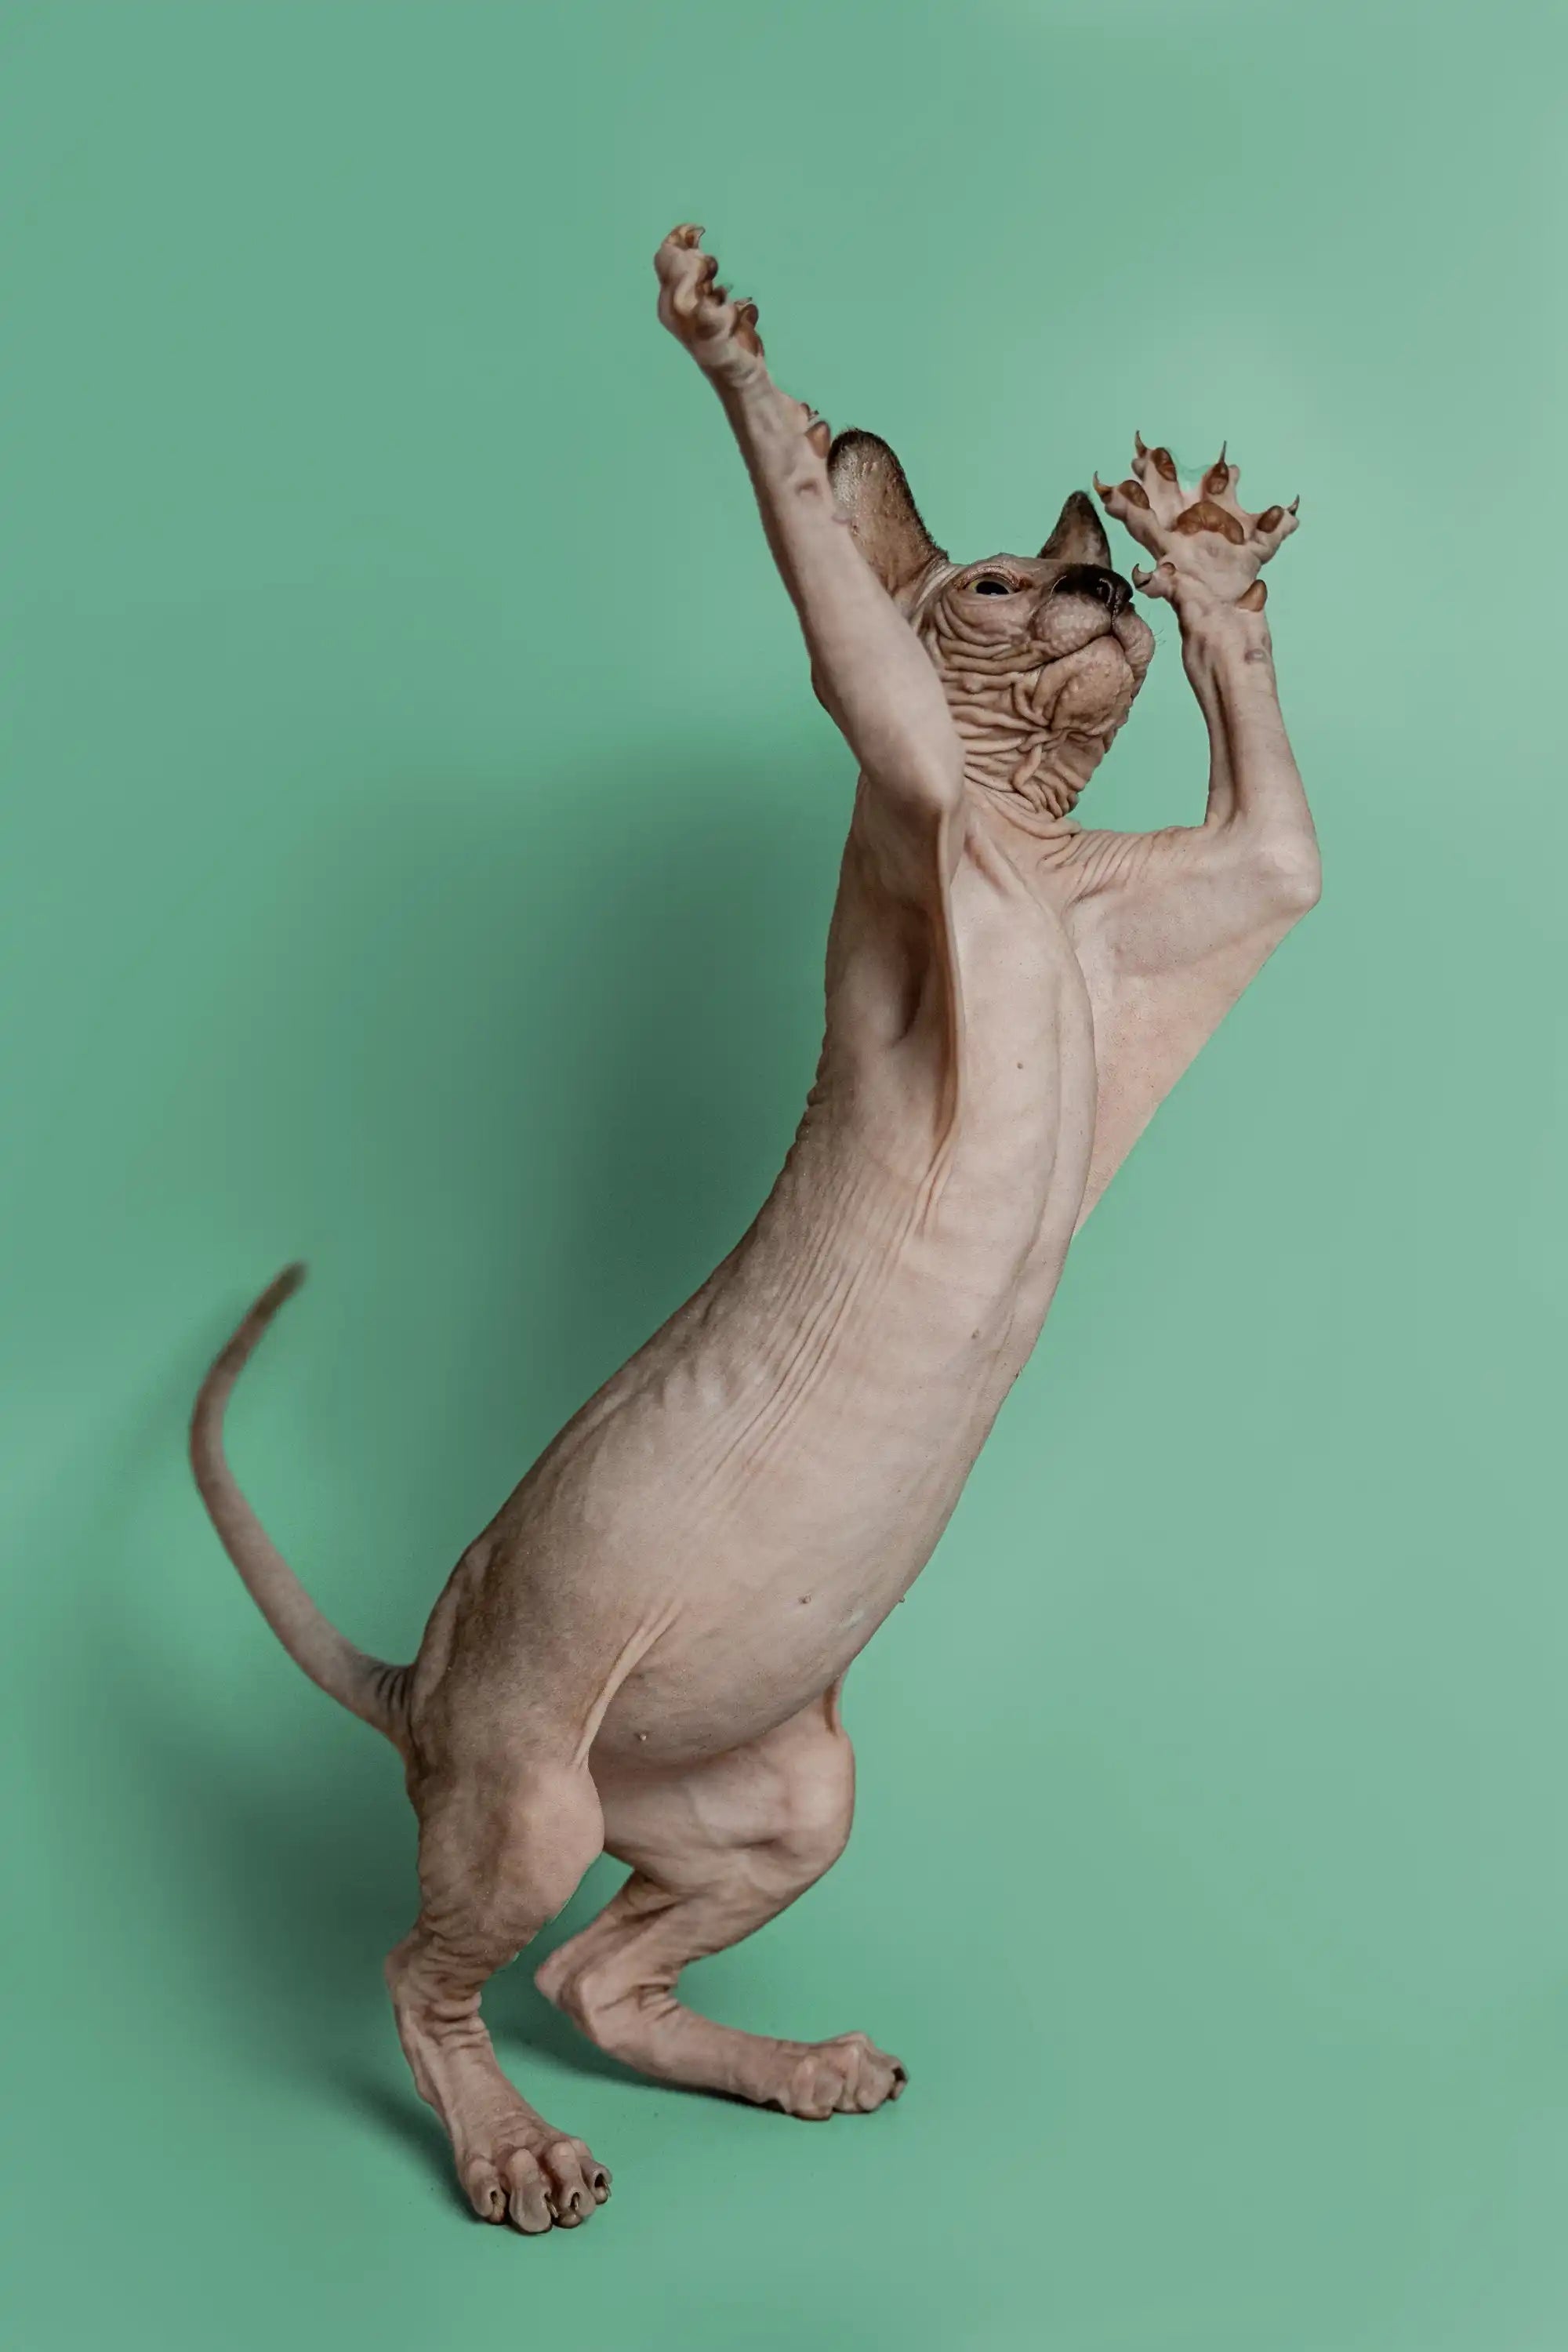 Sphynx Cats and Kittens for Sale Storm | Kitten